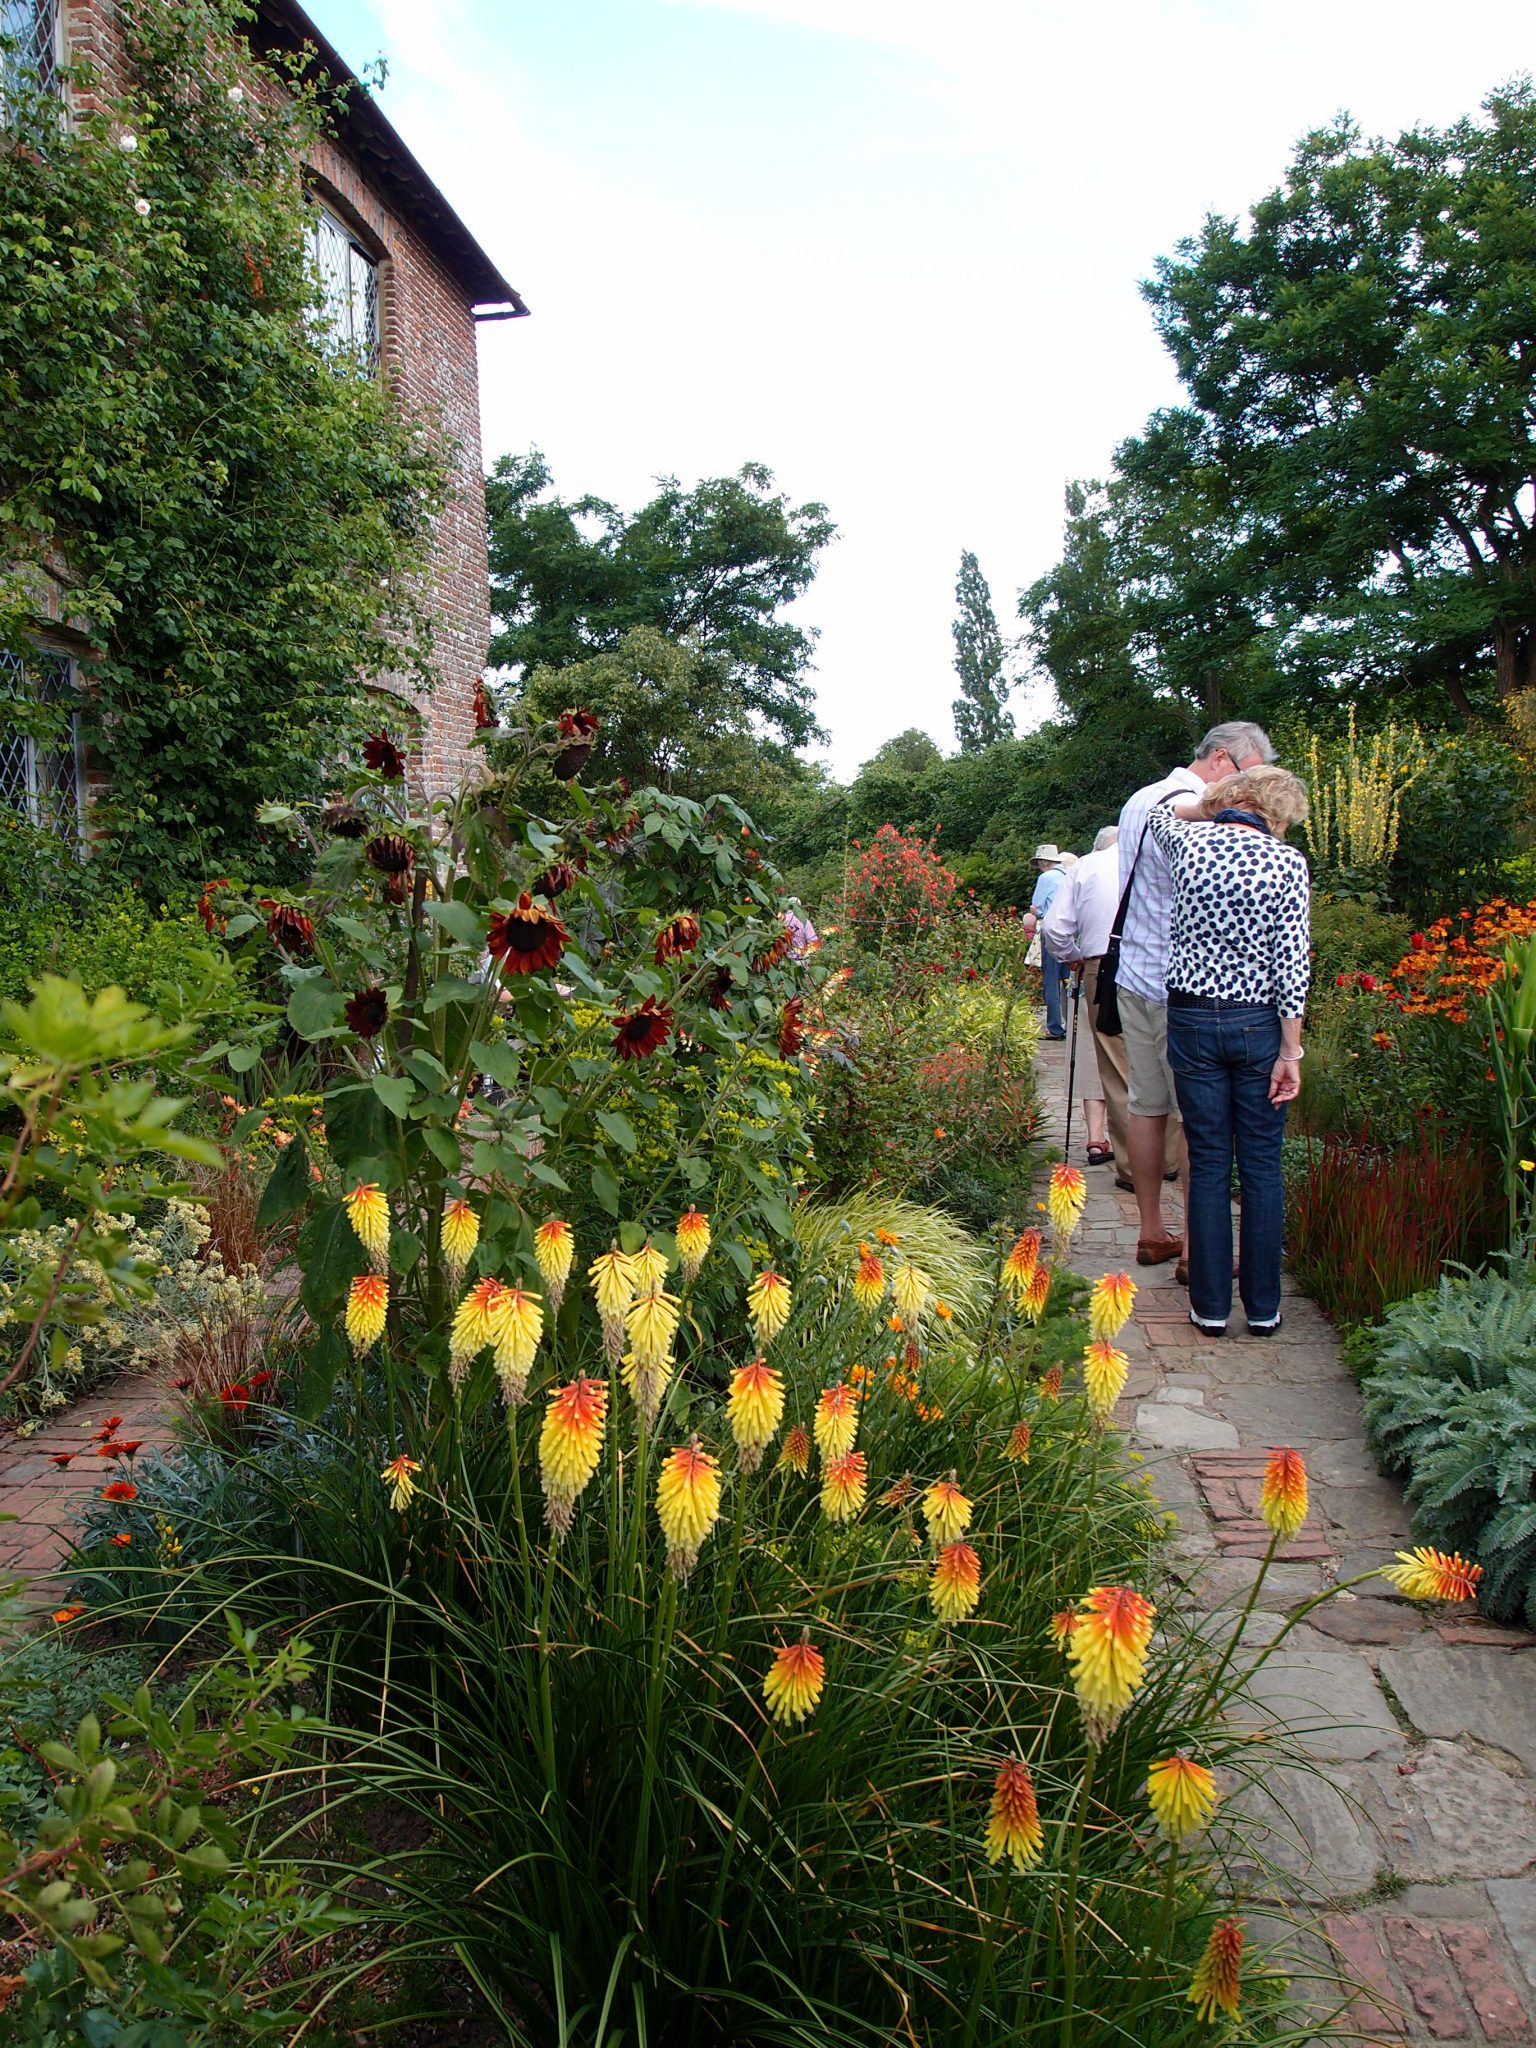 Leaving the Rose Garden, we entered the small Cottage Garden, which is always planted with rich orange, red and yellow flowers.